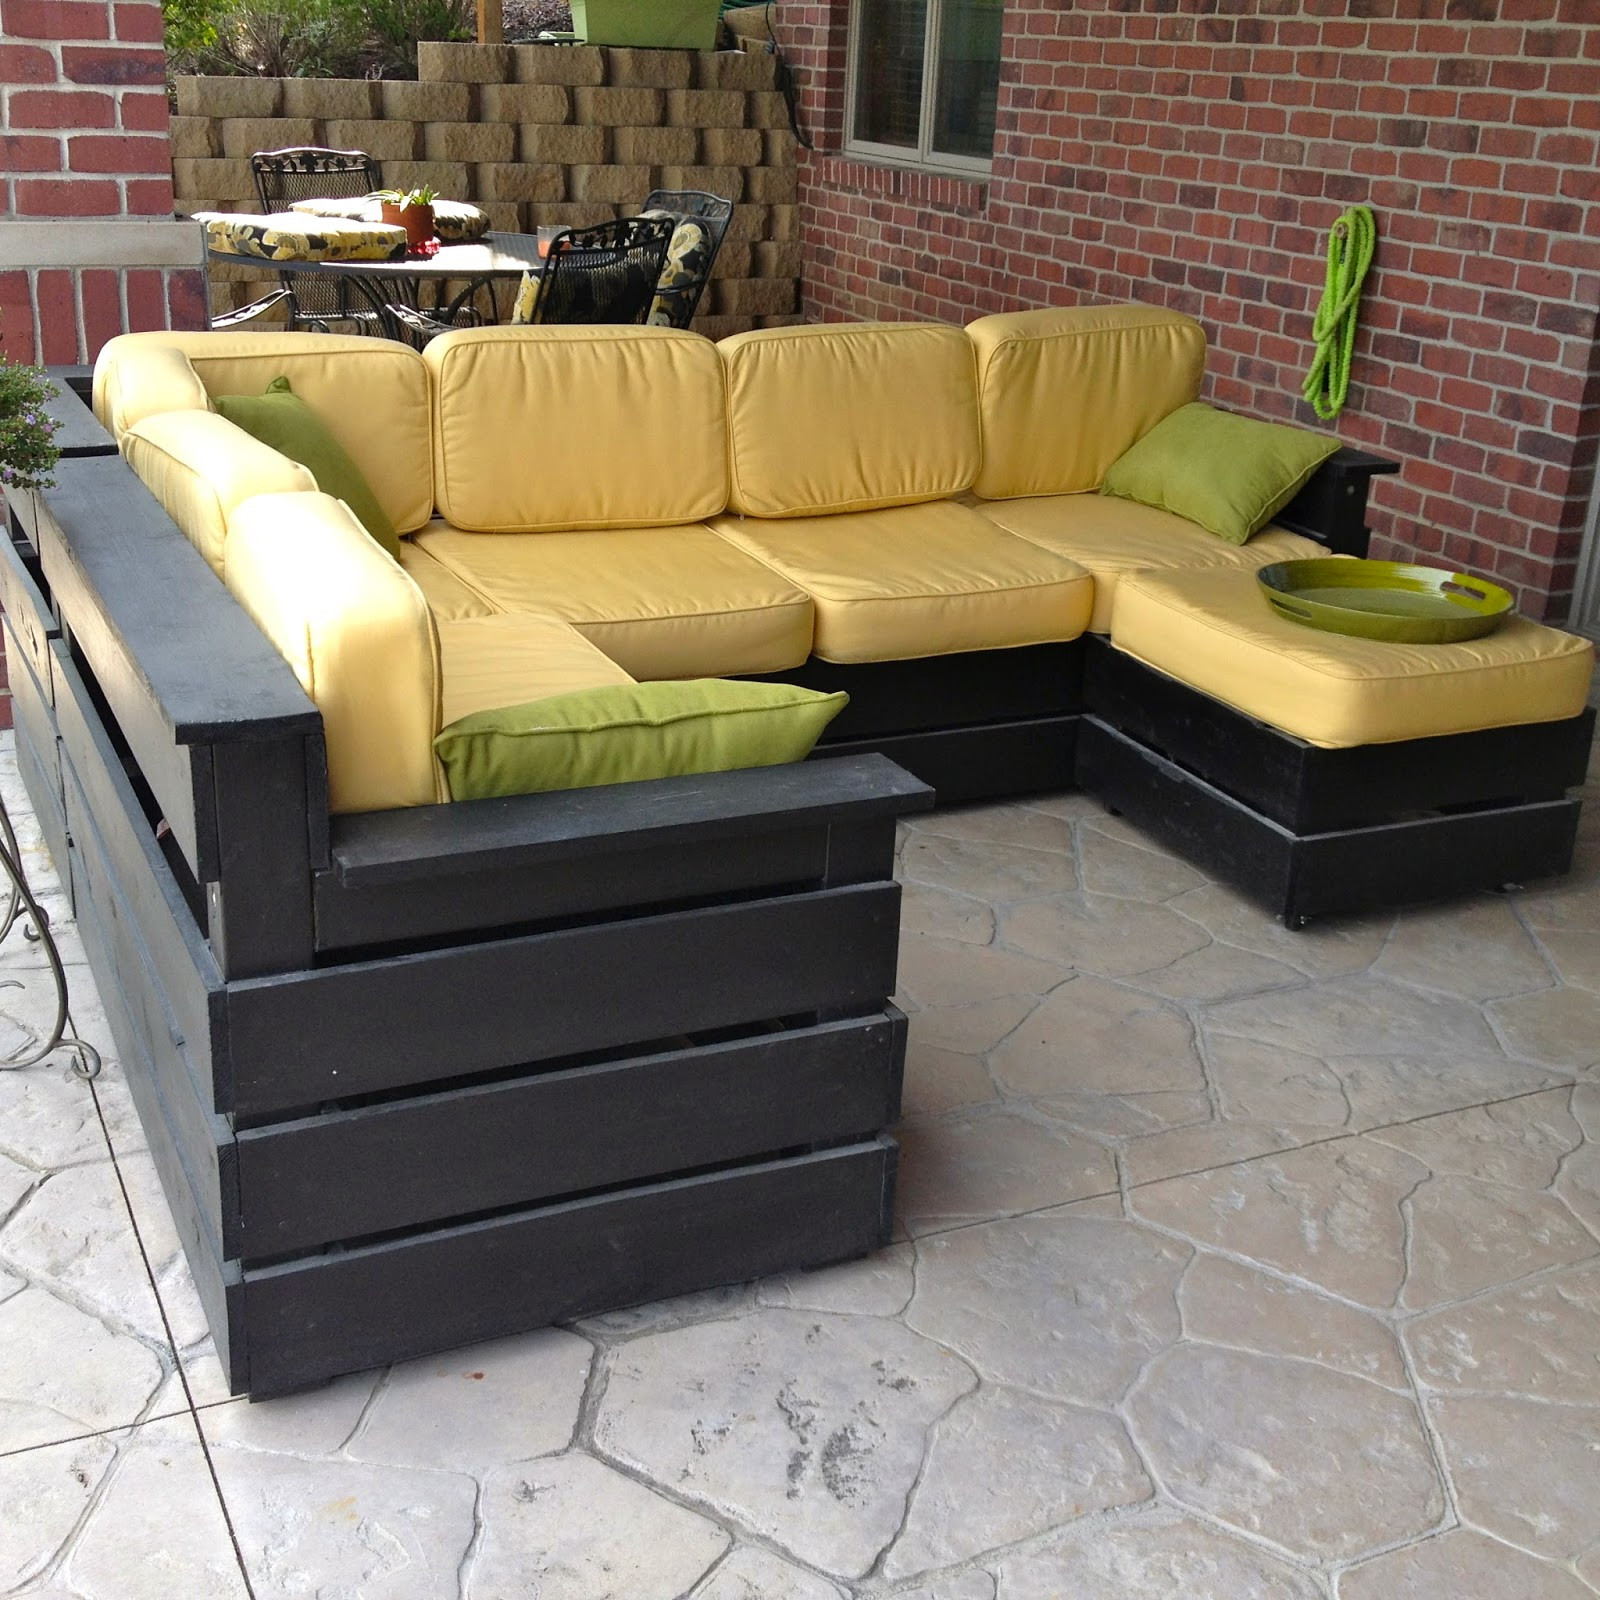 DIY Outdoor Furniture Plans
 DIY Why Spend More DIY Outdoor Sectional